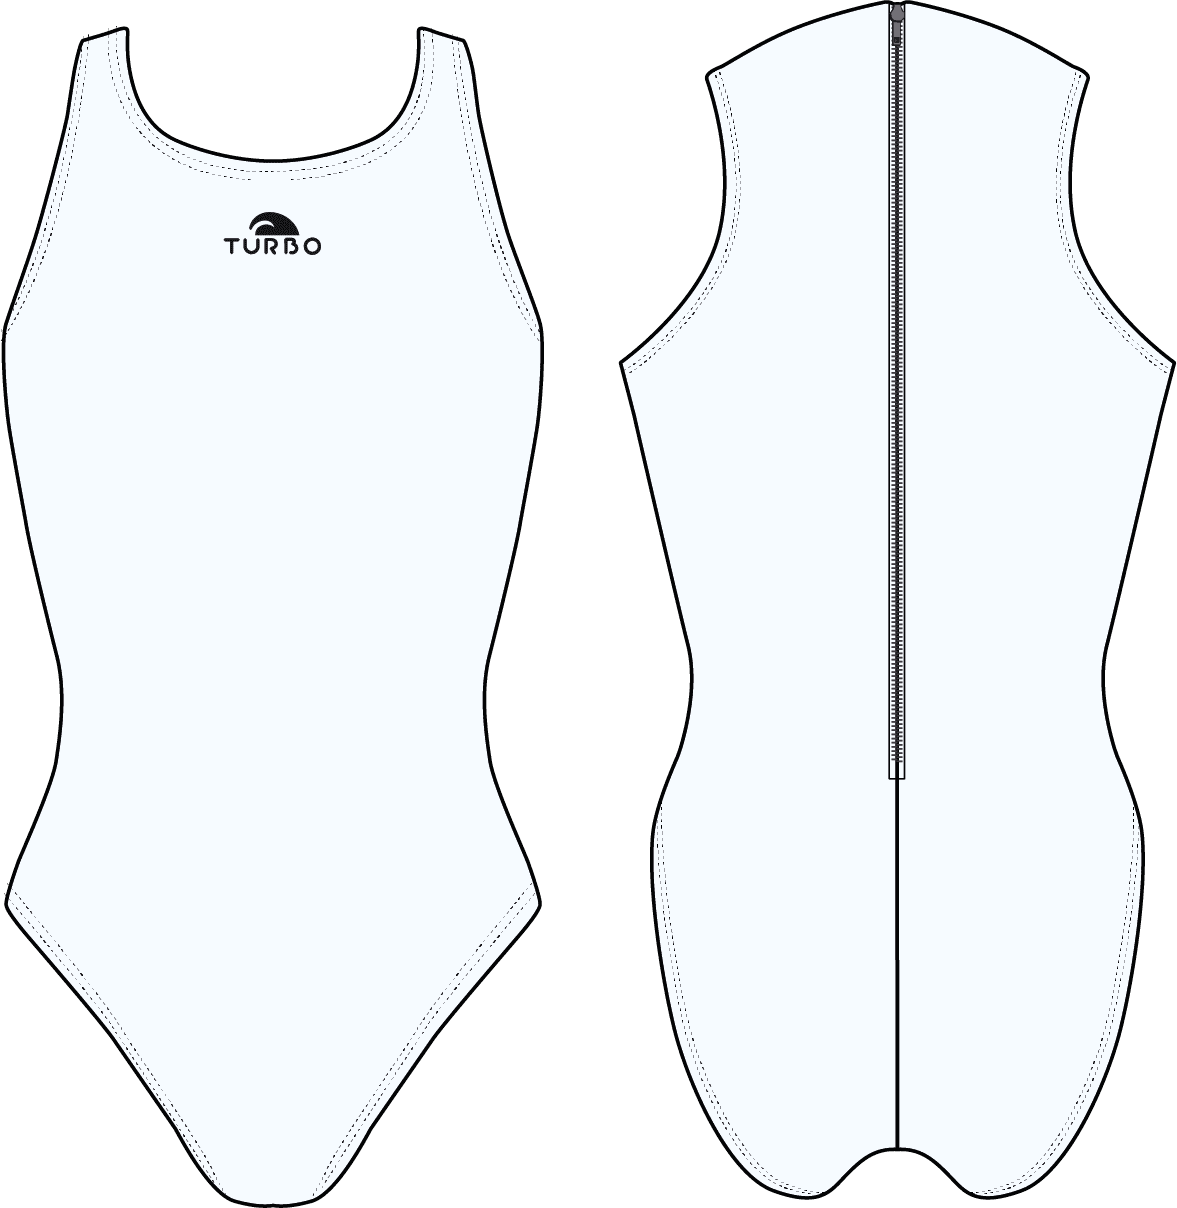 WATER POLO SUIT